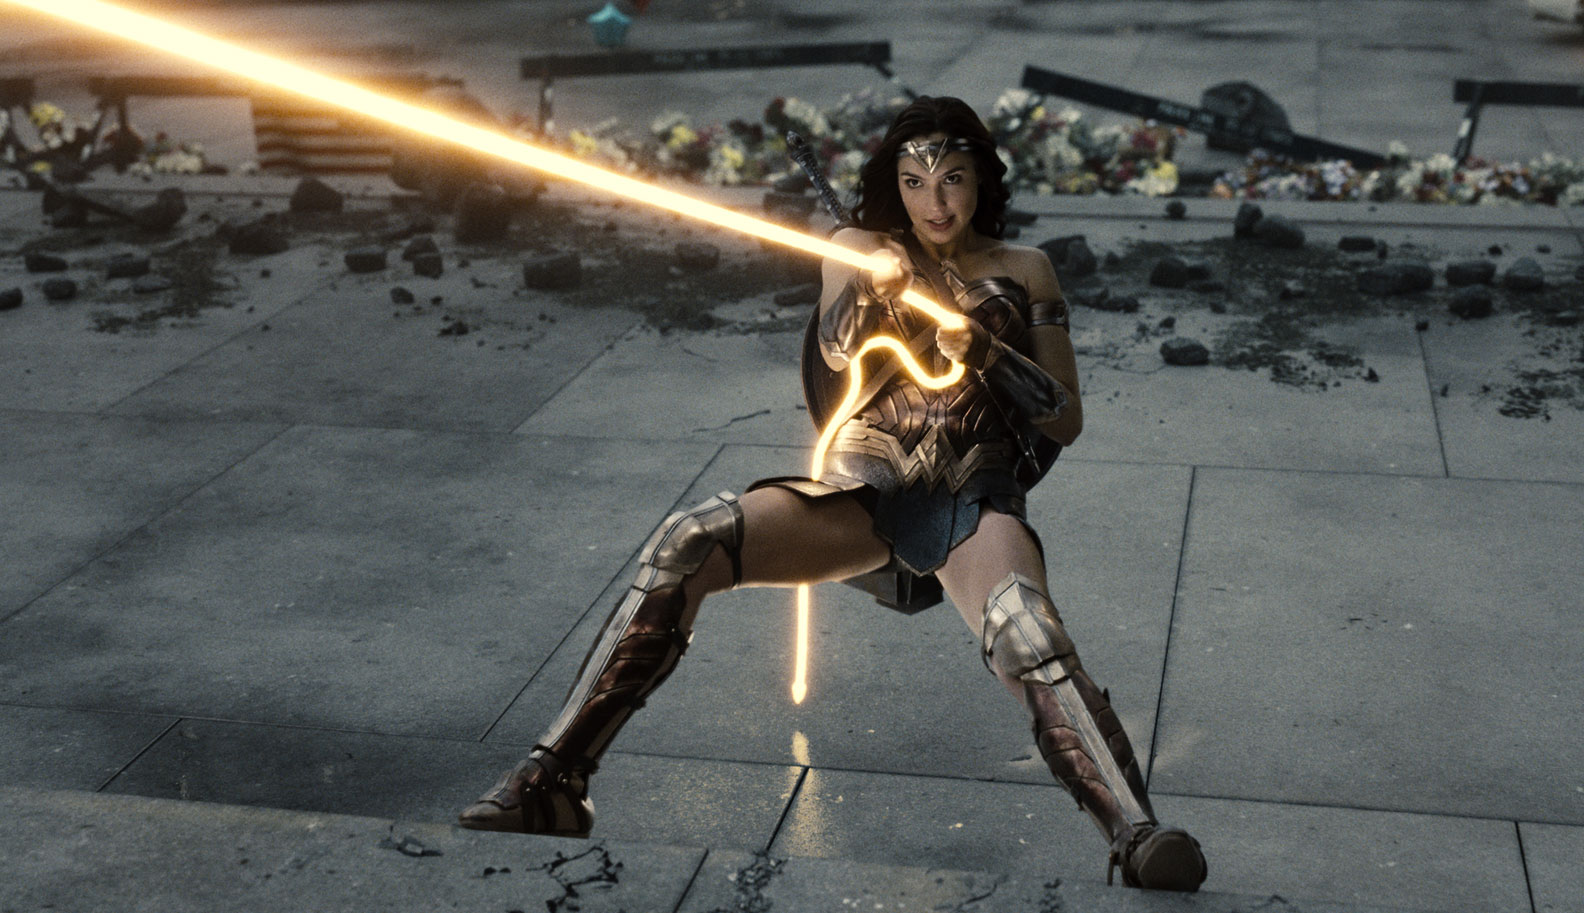 Gal Gadot in "Zack Snyder's Justice League"